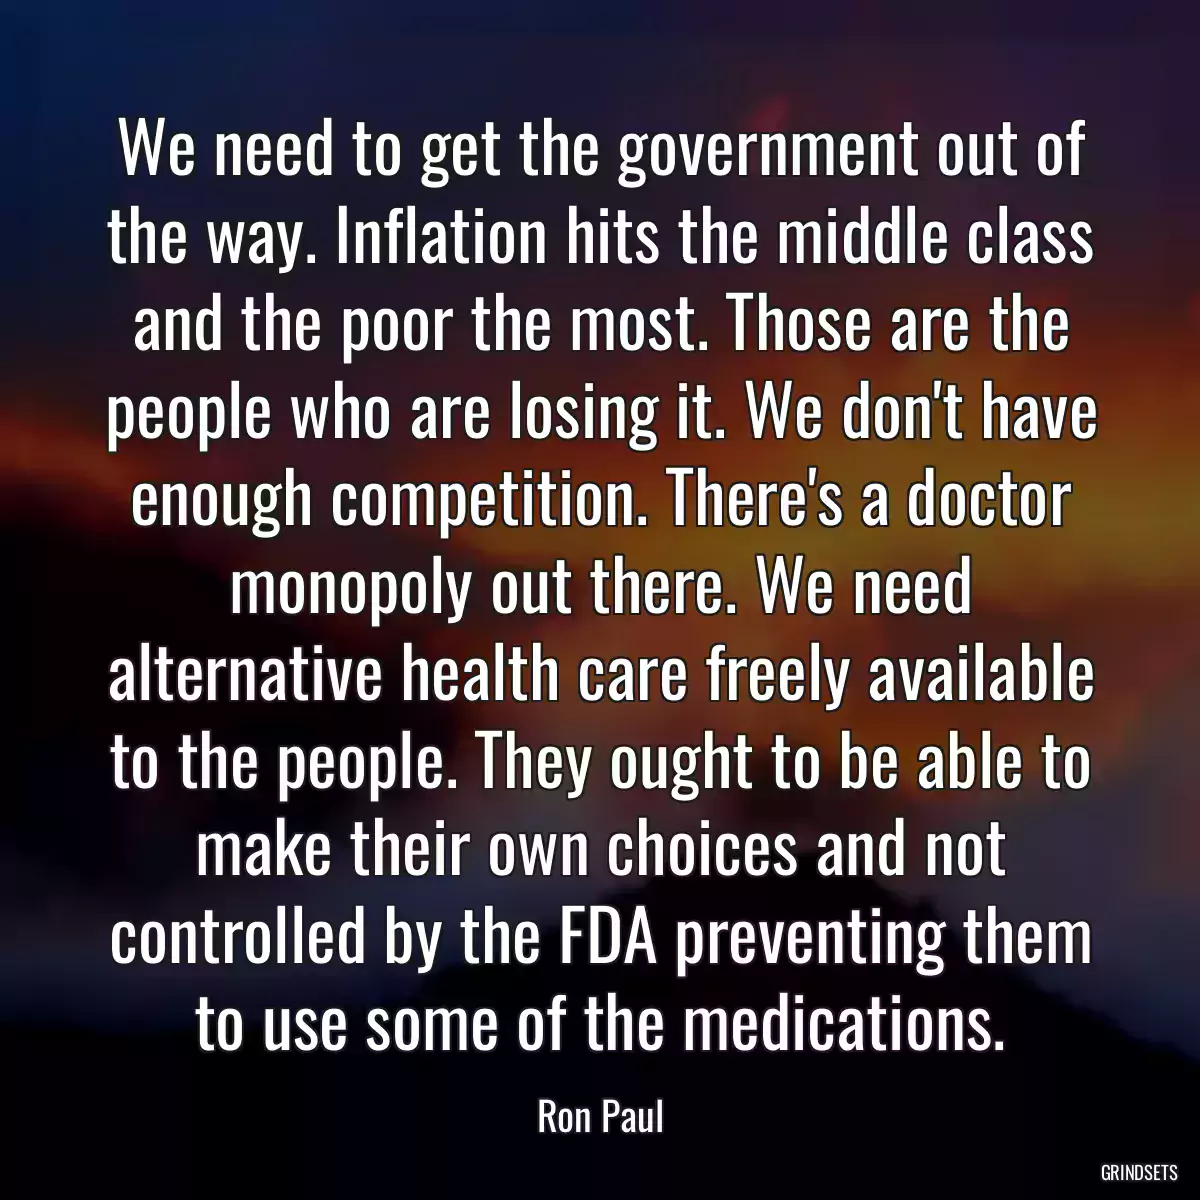 We need to get the government out of the way. Inflation hits the middle class and the poor the most. Those are the people who are losing it. We don\'t have enough competition. There\'s a doctor monopoly out there. We need alternative health care freely available to the people. They ought to be able to make their own choices and not controlled by the FDA preventing them to use some of the medications.